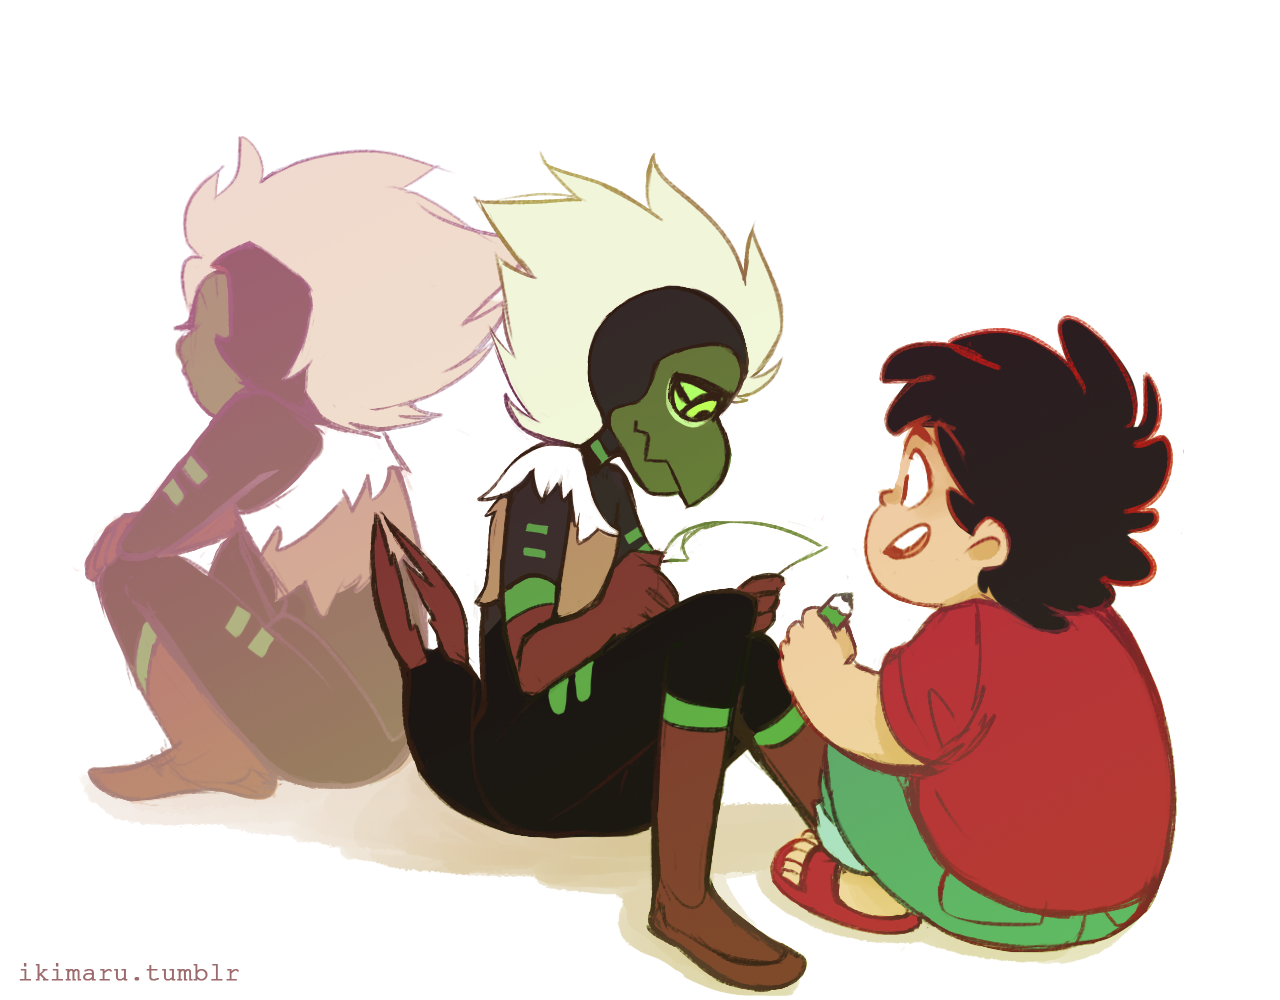 got around finishing some Centipeetle from a while back 8′)